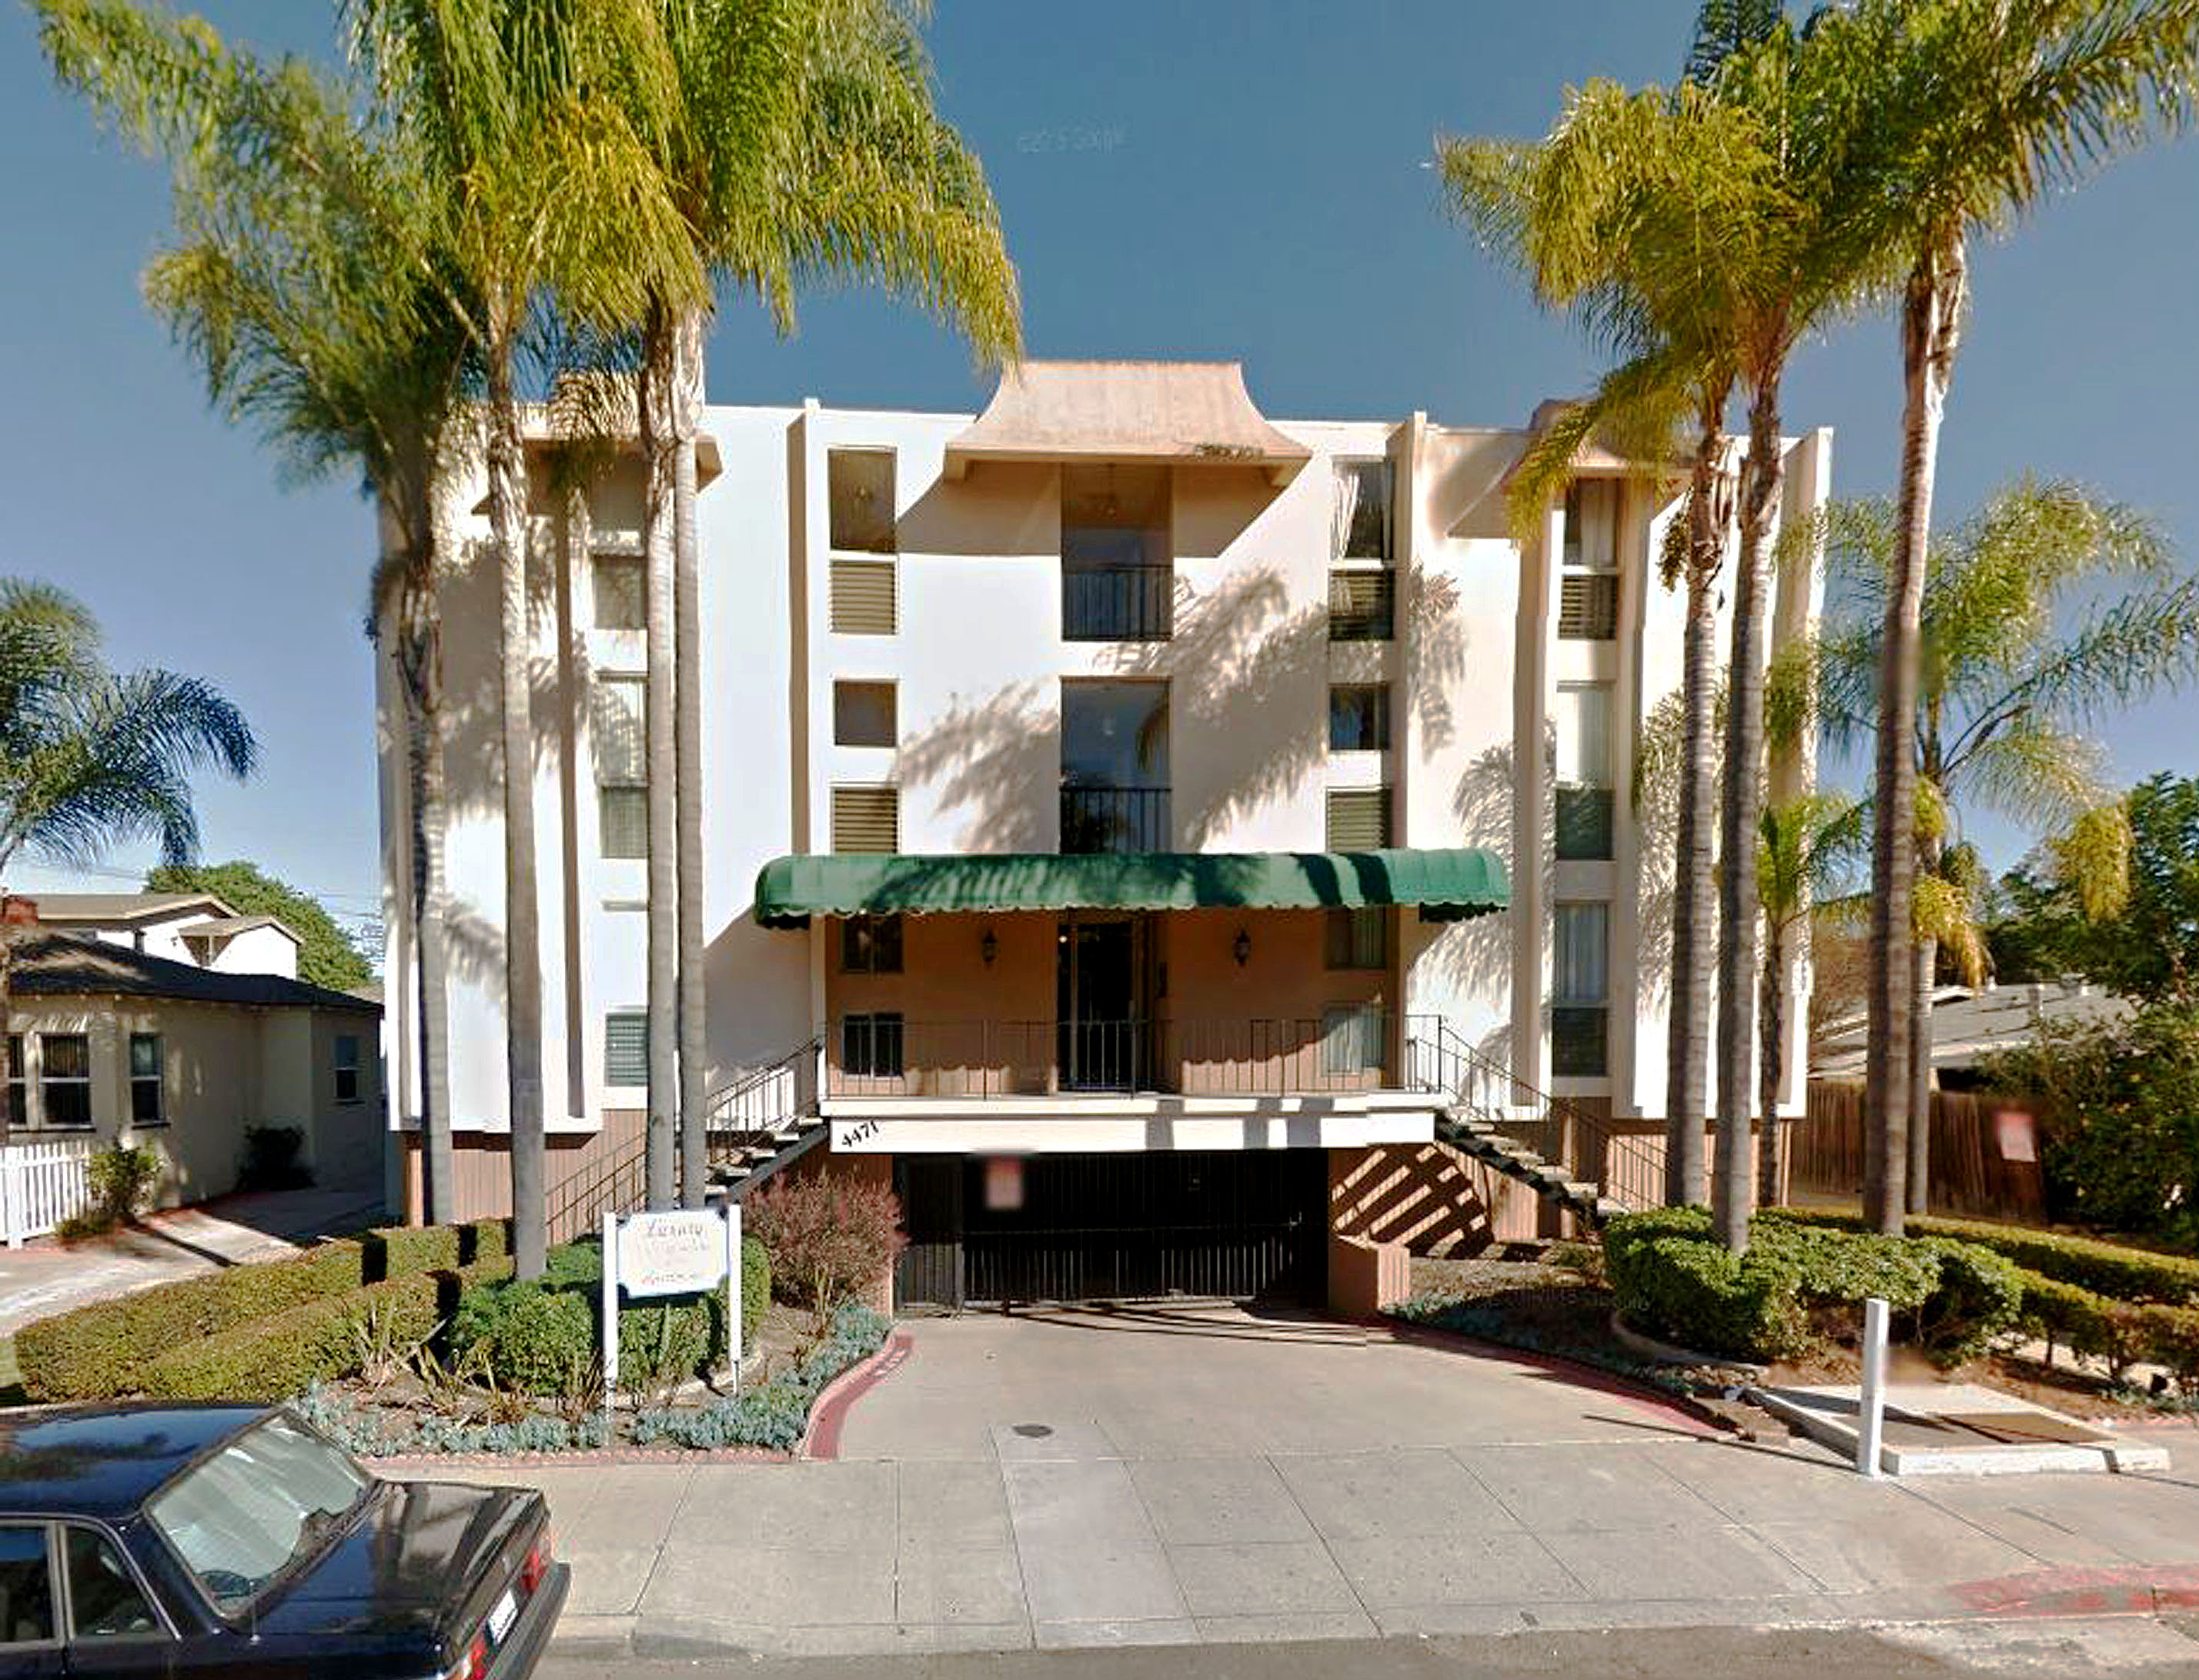 San Diego Apartment Property Sold for $3.4 Million | San Diego Business